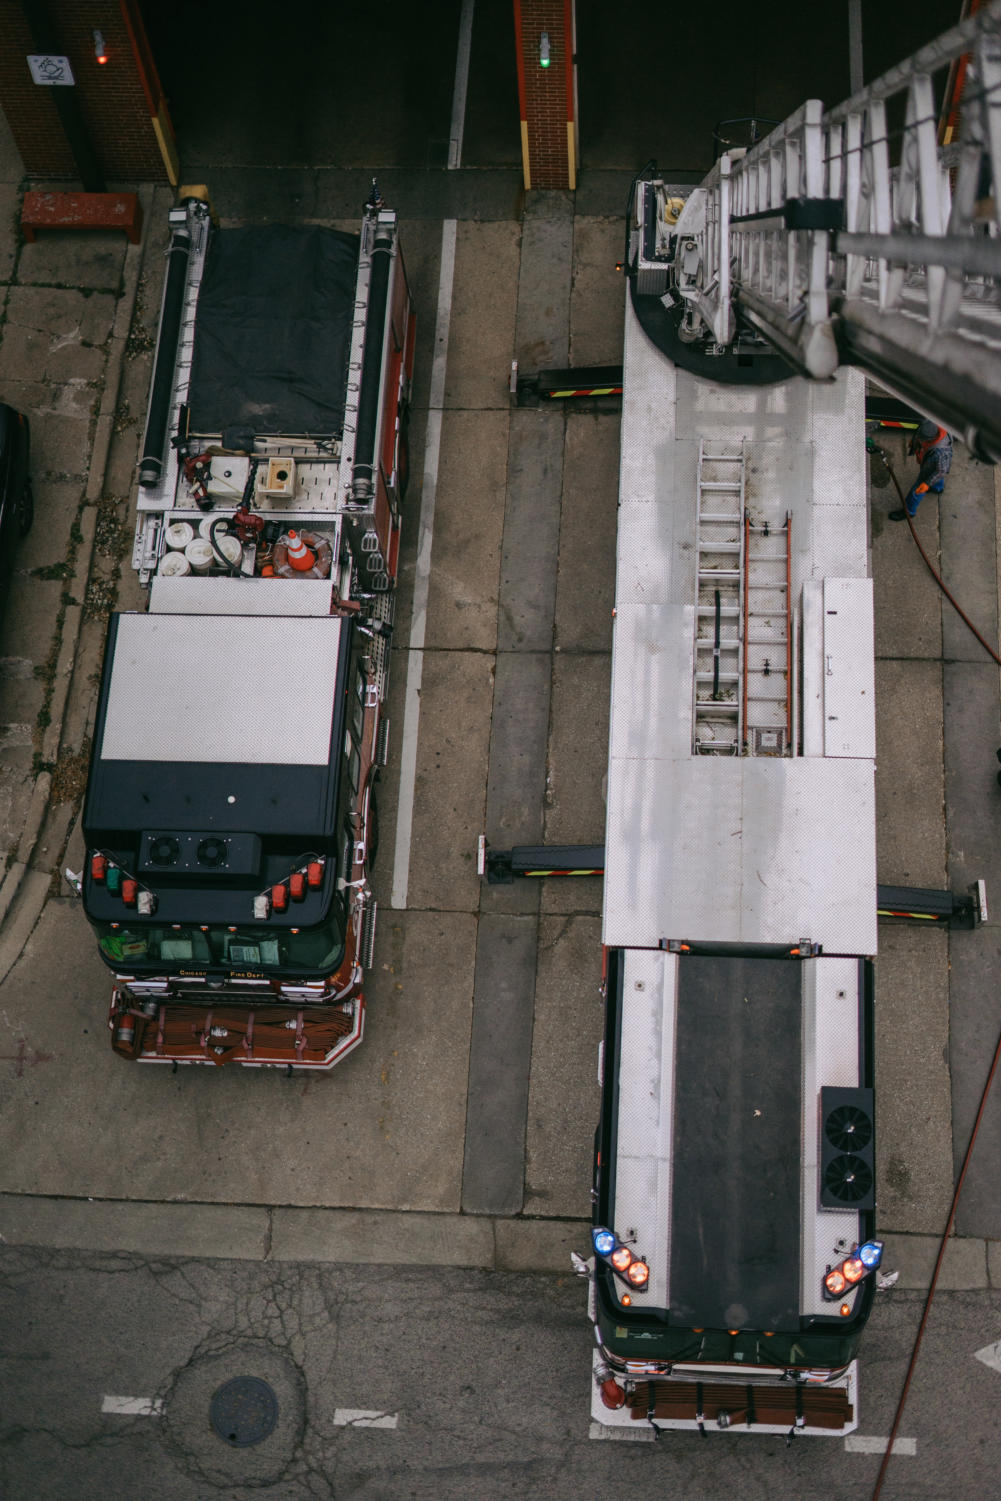 Tower Co. 37 and Engine Co. 60 seen from 100 feet in the air on their extended ladder